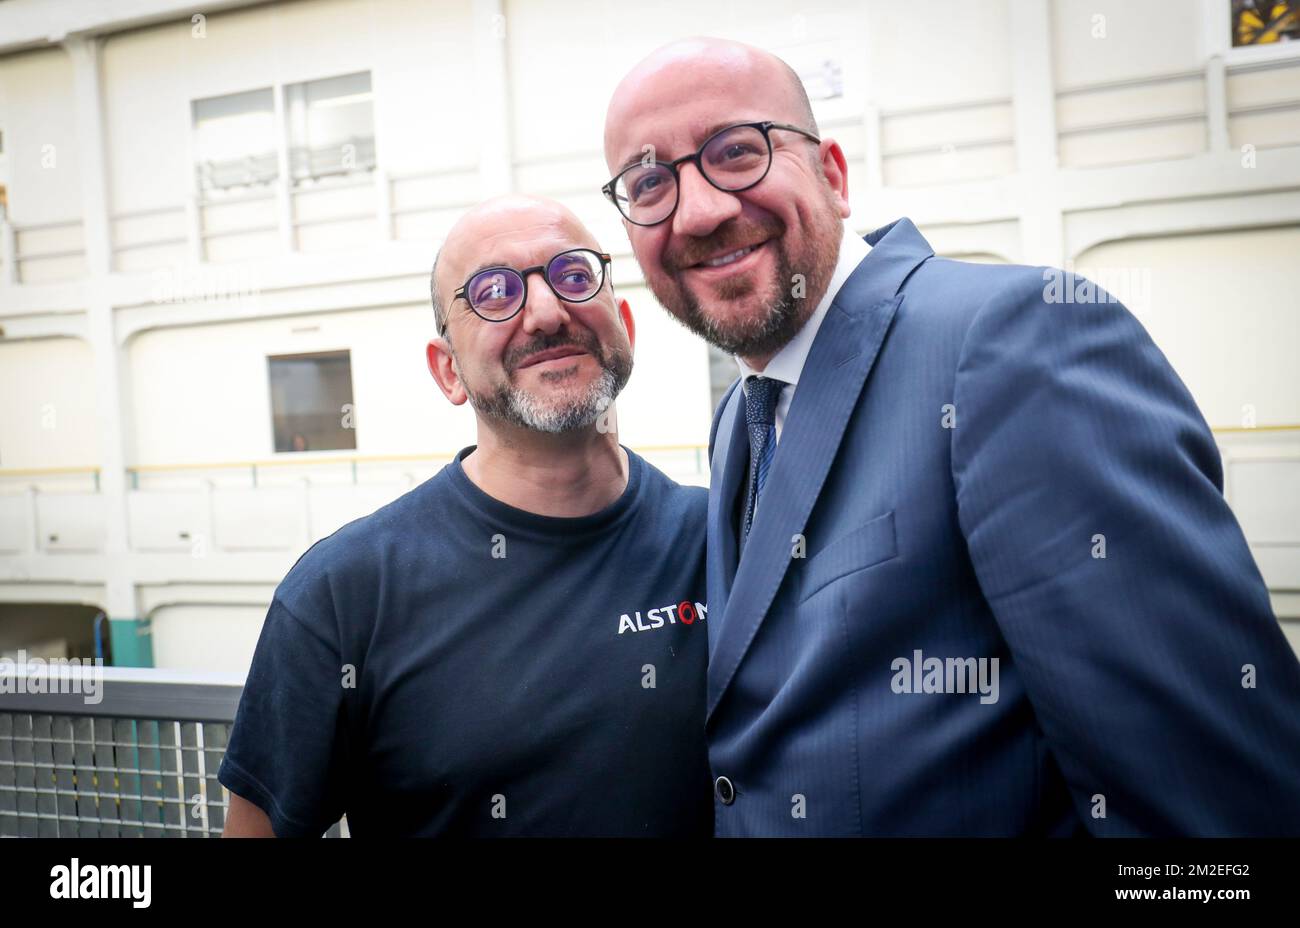 Belgian Prime Minister Charles Michel and a doppleganger pictured during a visit to the Alstom transport materials producer in Charleroi, Tuesday 17 April 2018. BELGA PHOTO VIRGINIE LEFOUR Stock Photo